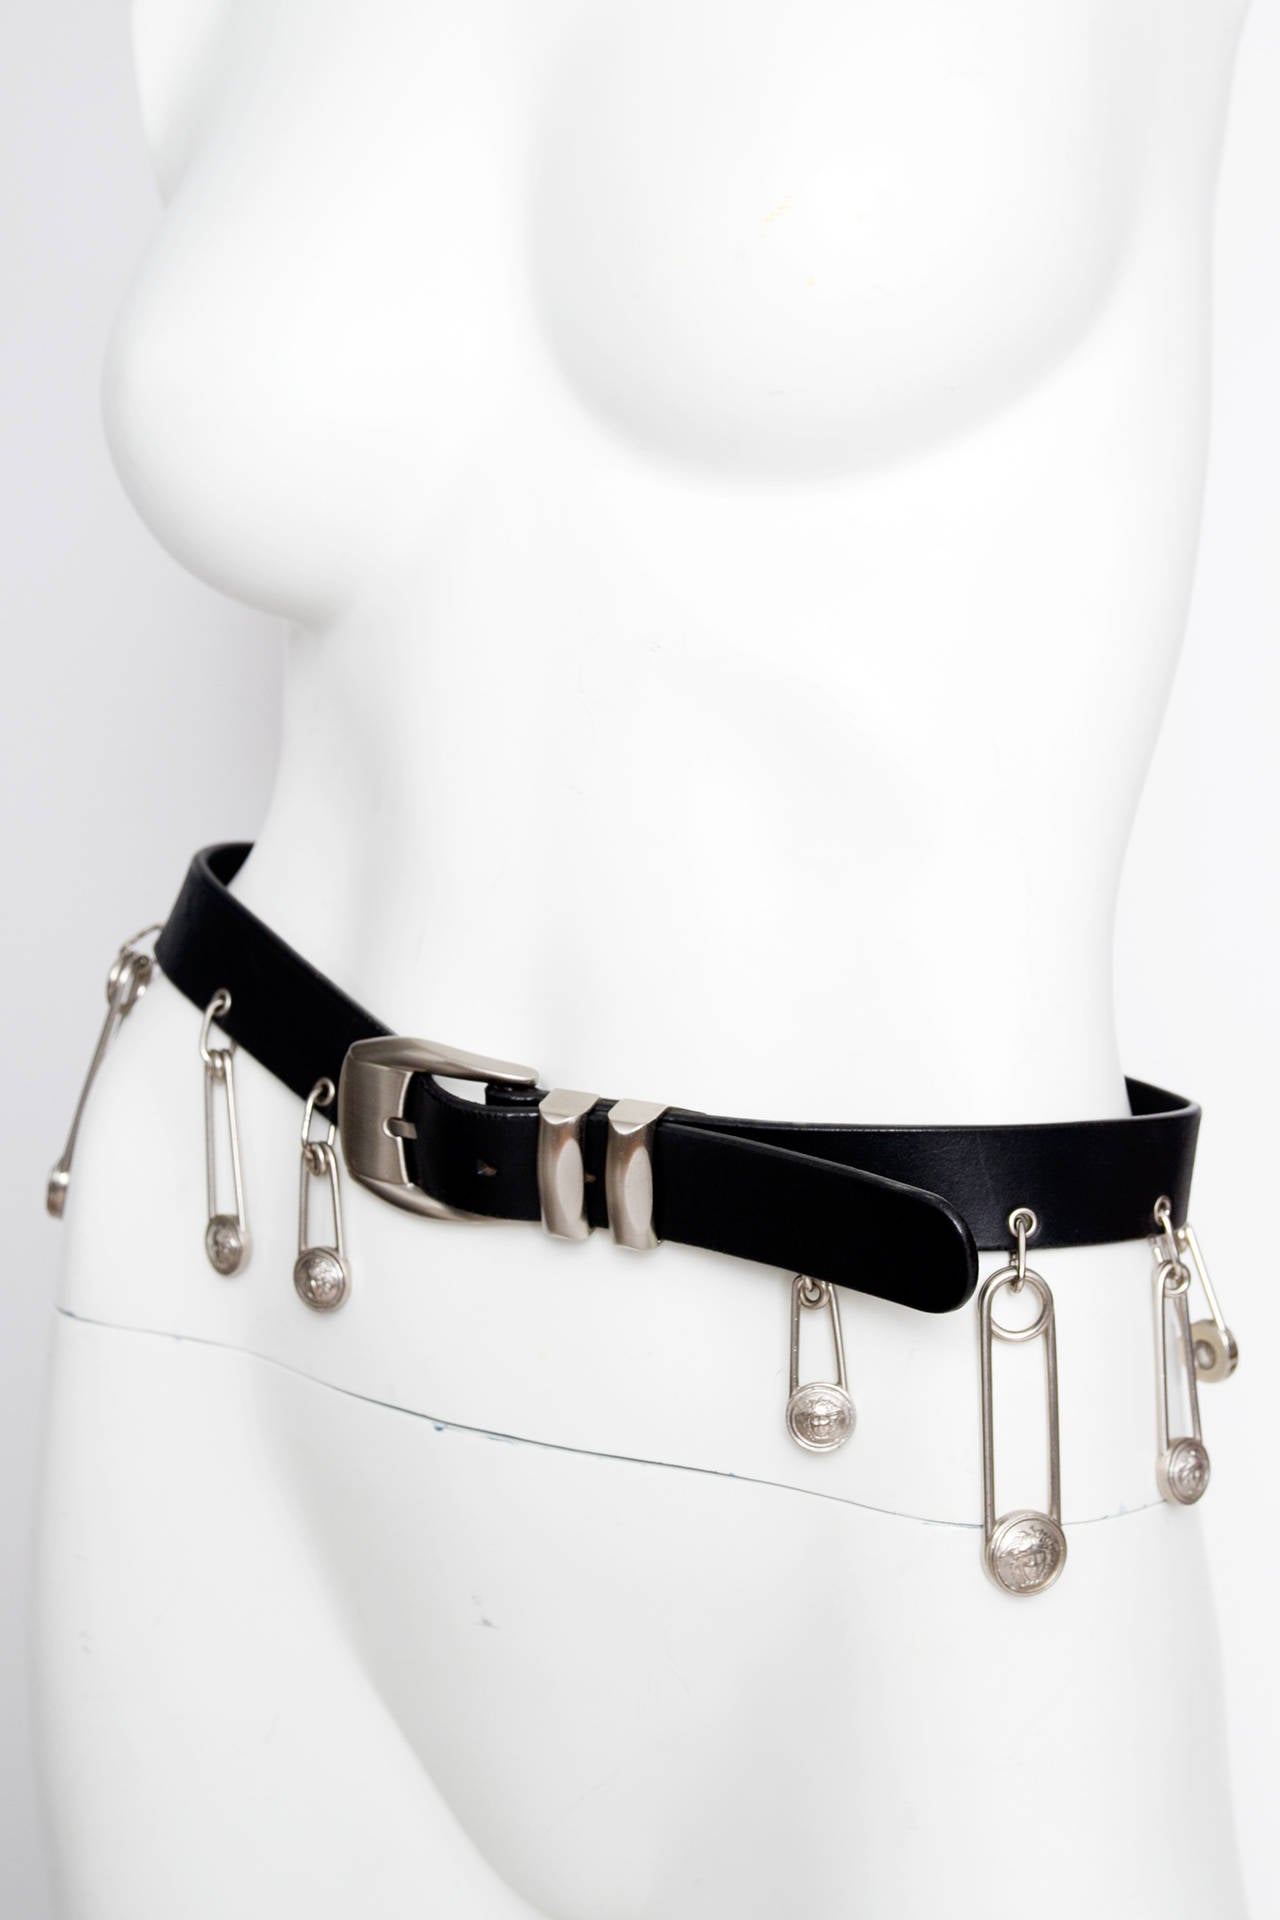 An iconic 1990s Gianni Versace black leather belt with silver hardware and exaggerated safety pin details.  The safety pins have the iconic medusa imprint and are in varying size. 

The belt holes are between 72 and 78.